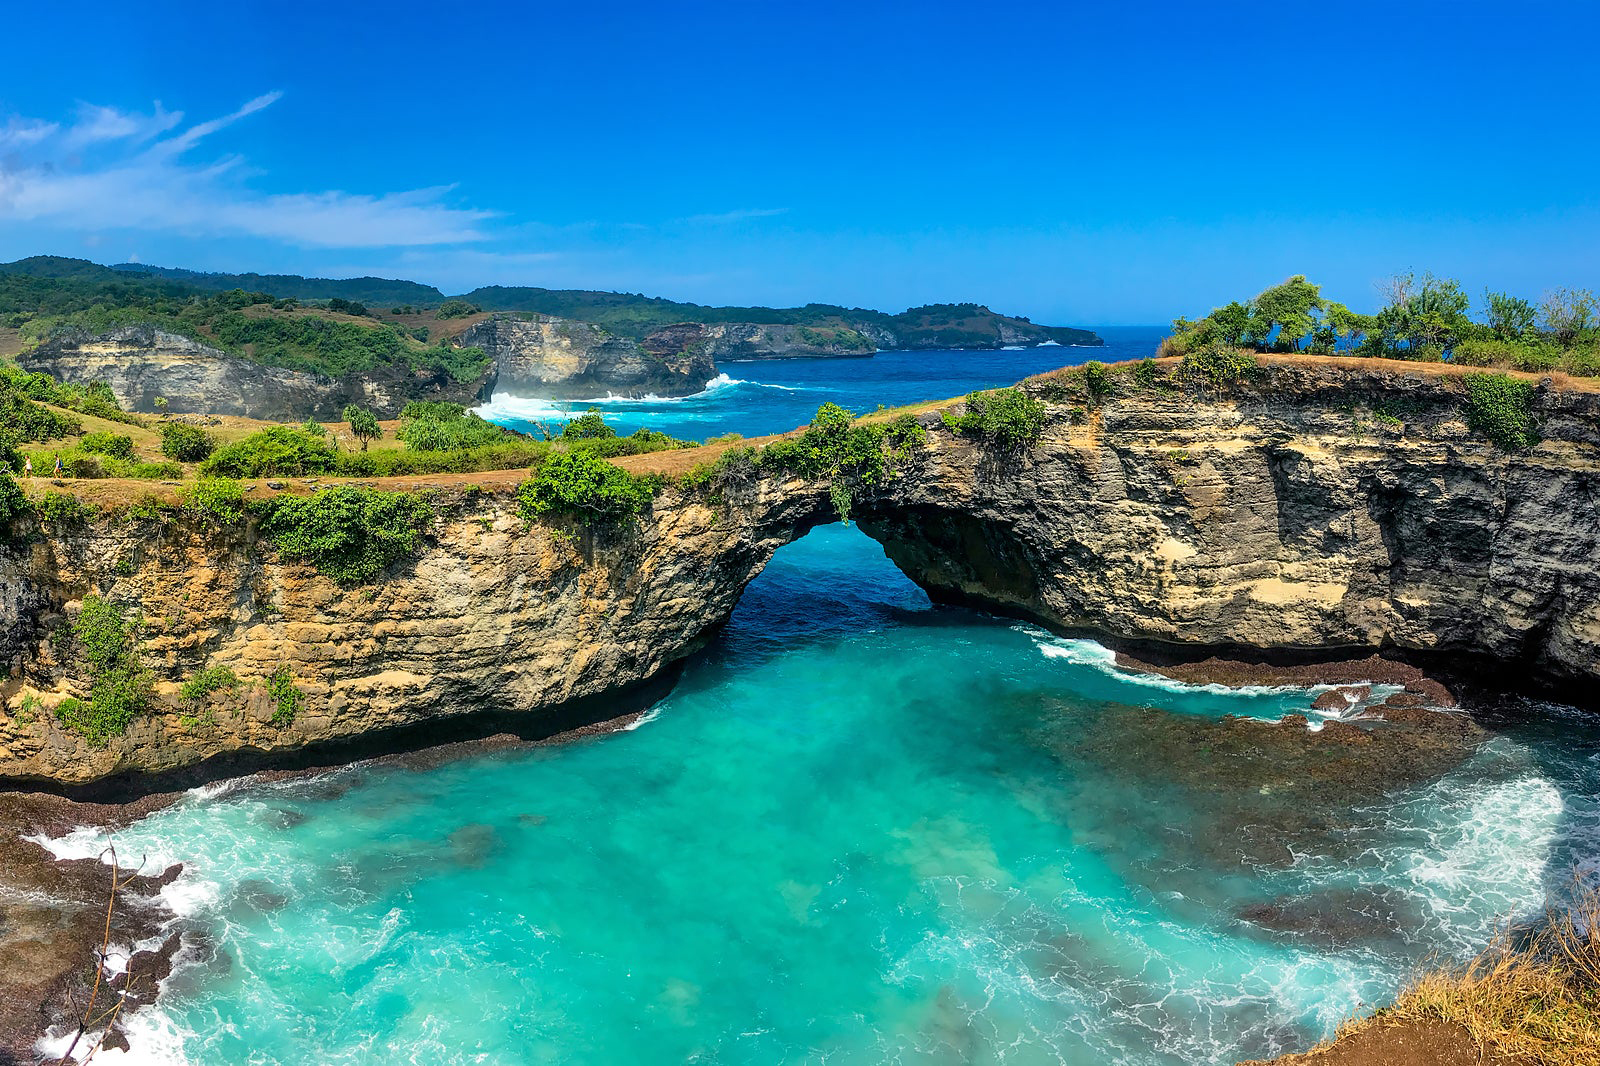 Nusa Penida is a beautiful island located off the southeastern coast of Bali. This hidden gem is the largest of the three Nusa Islands, which also include Nusa Lembongan and Nusa Ceningan. Nusa Penida has become increasingly popular over the past few years due to its stunning landscapes, crystal-clear waters, and untouched natural beauty.